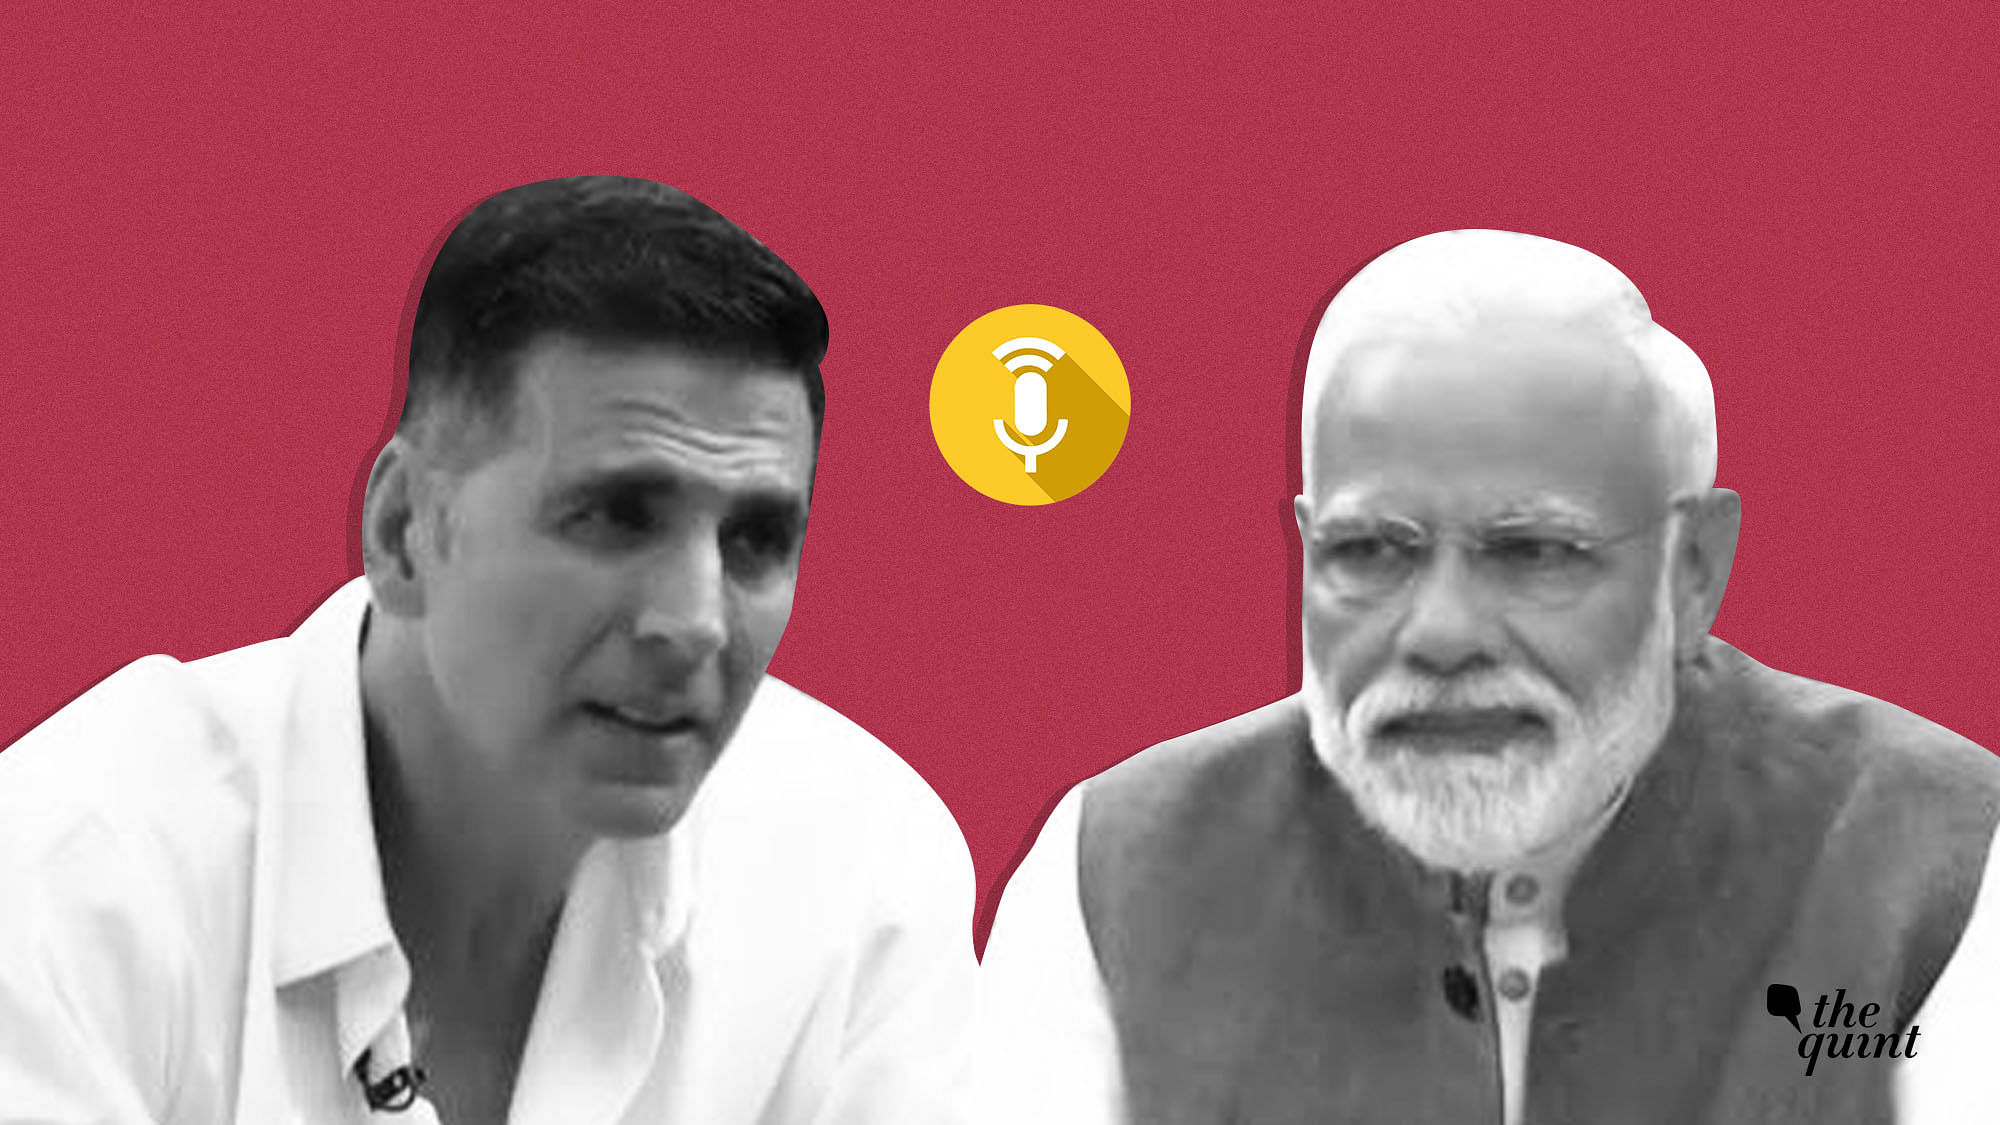 Akshay Kumar said he wanted the interview to be apolitical and find out, as a person, what’s our PM like. Here’s what he should have ACTUALLY asked the prime minister.